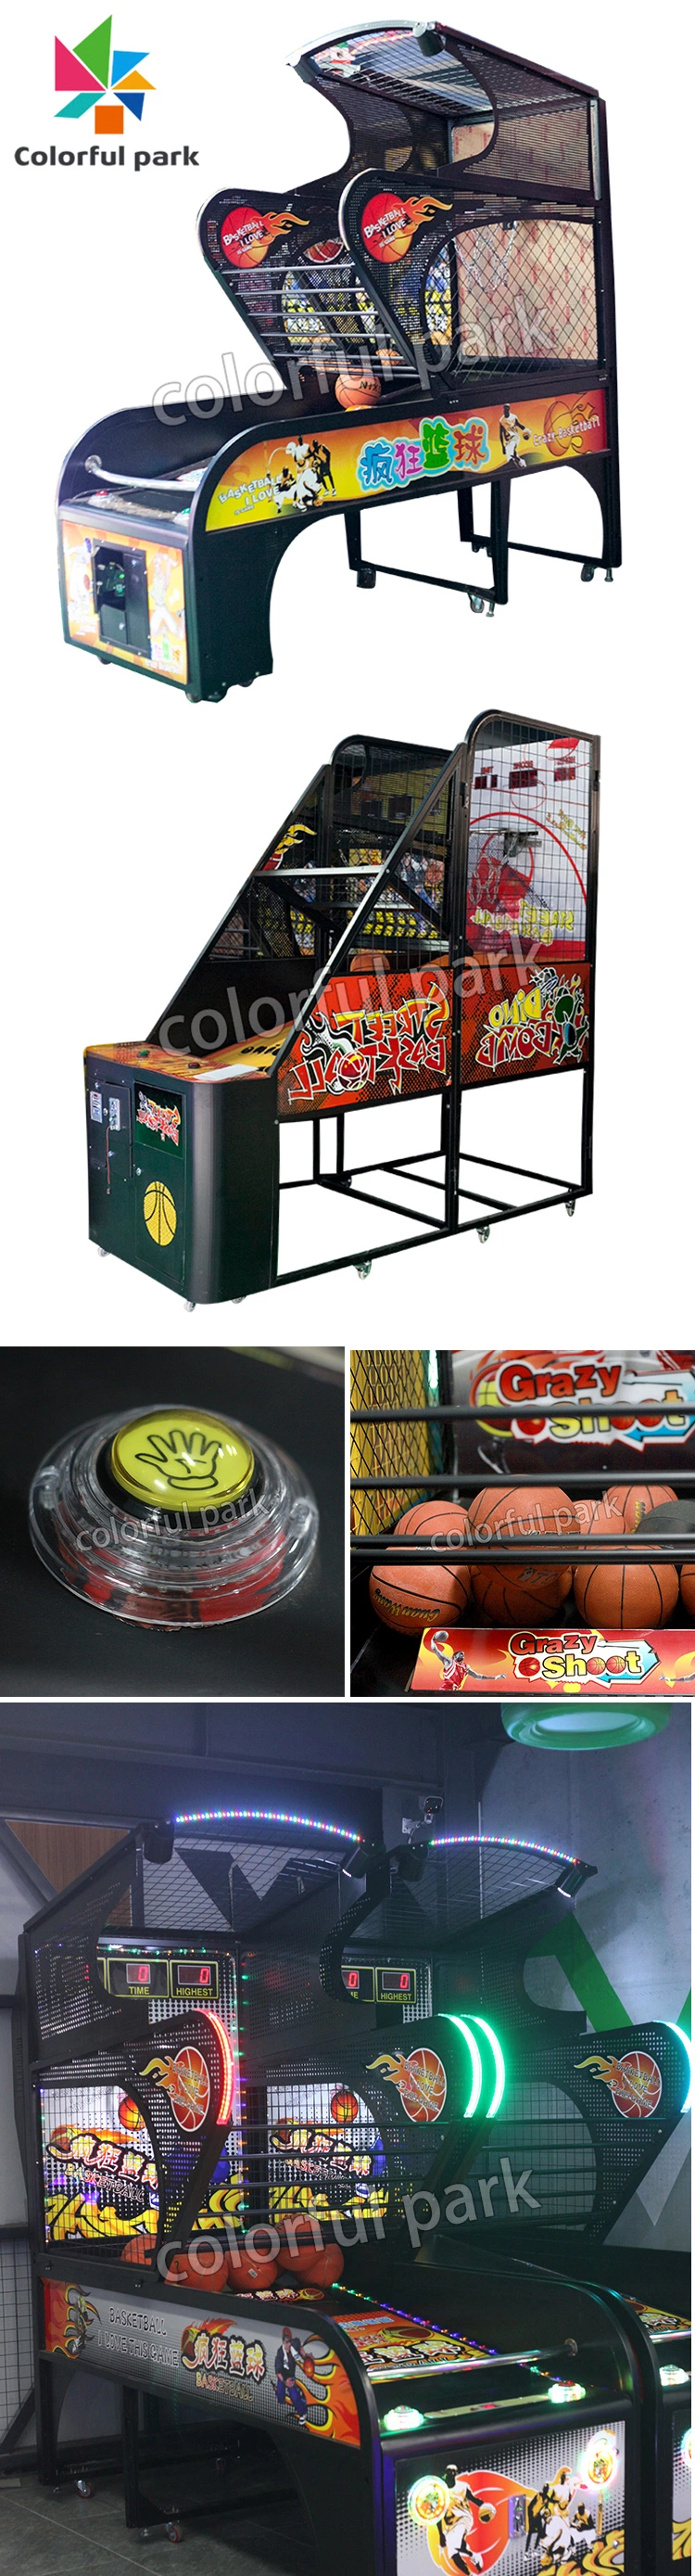 Colorful Park Skiing Game Machine Coin Operated Basketball Game Machine Arcade Game Machine